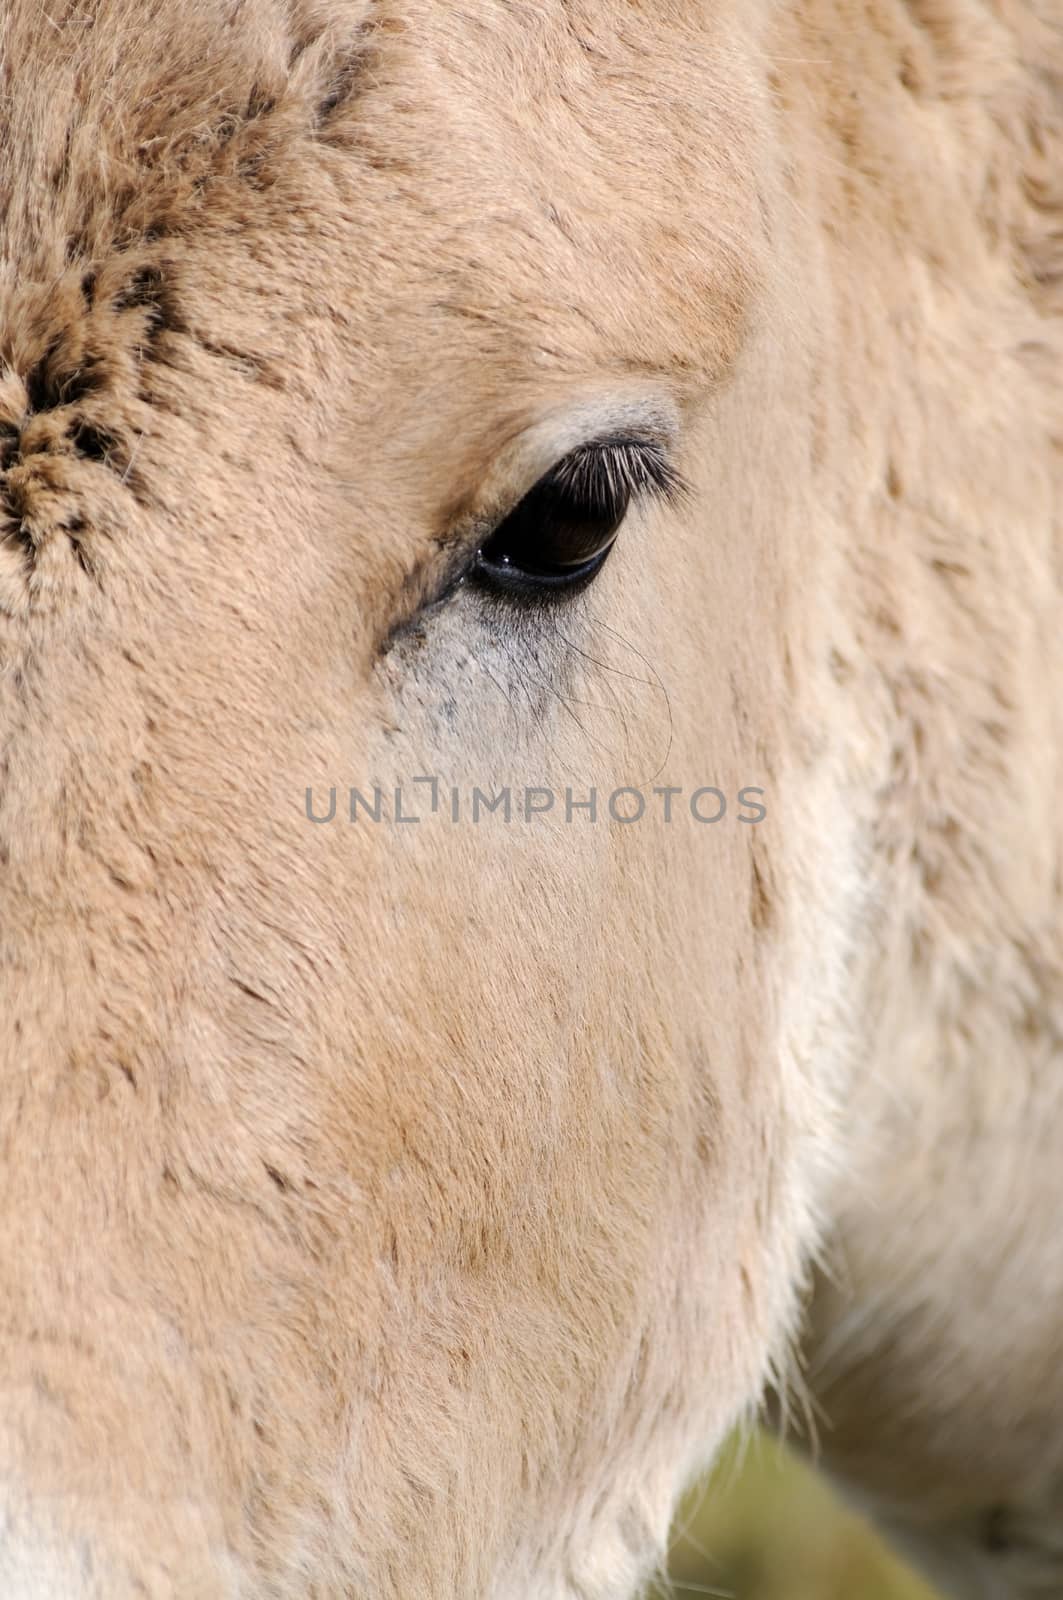 Closeup of onager head and eye showing fur detail